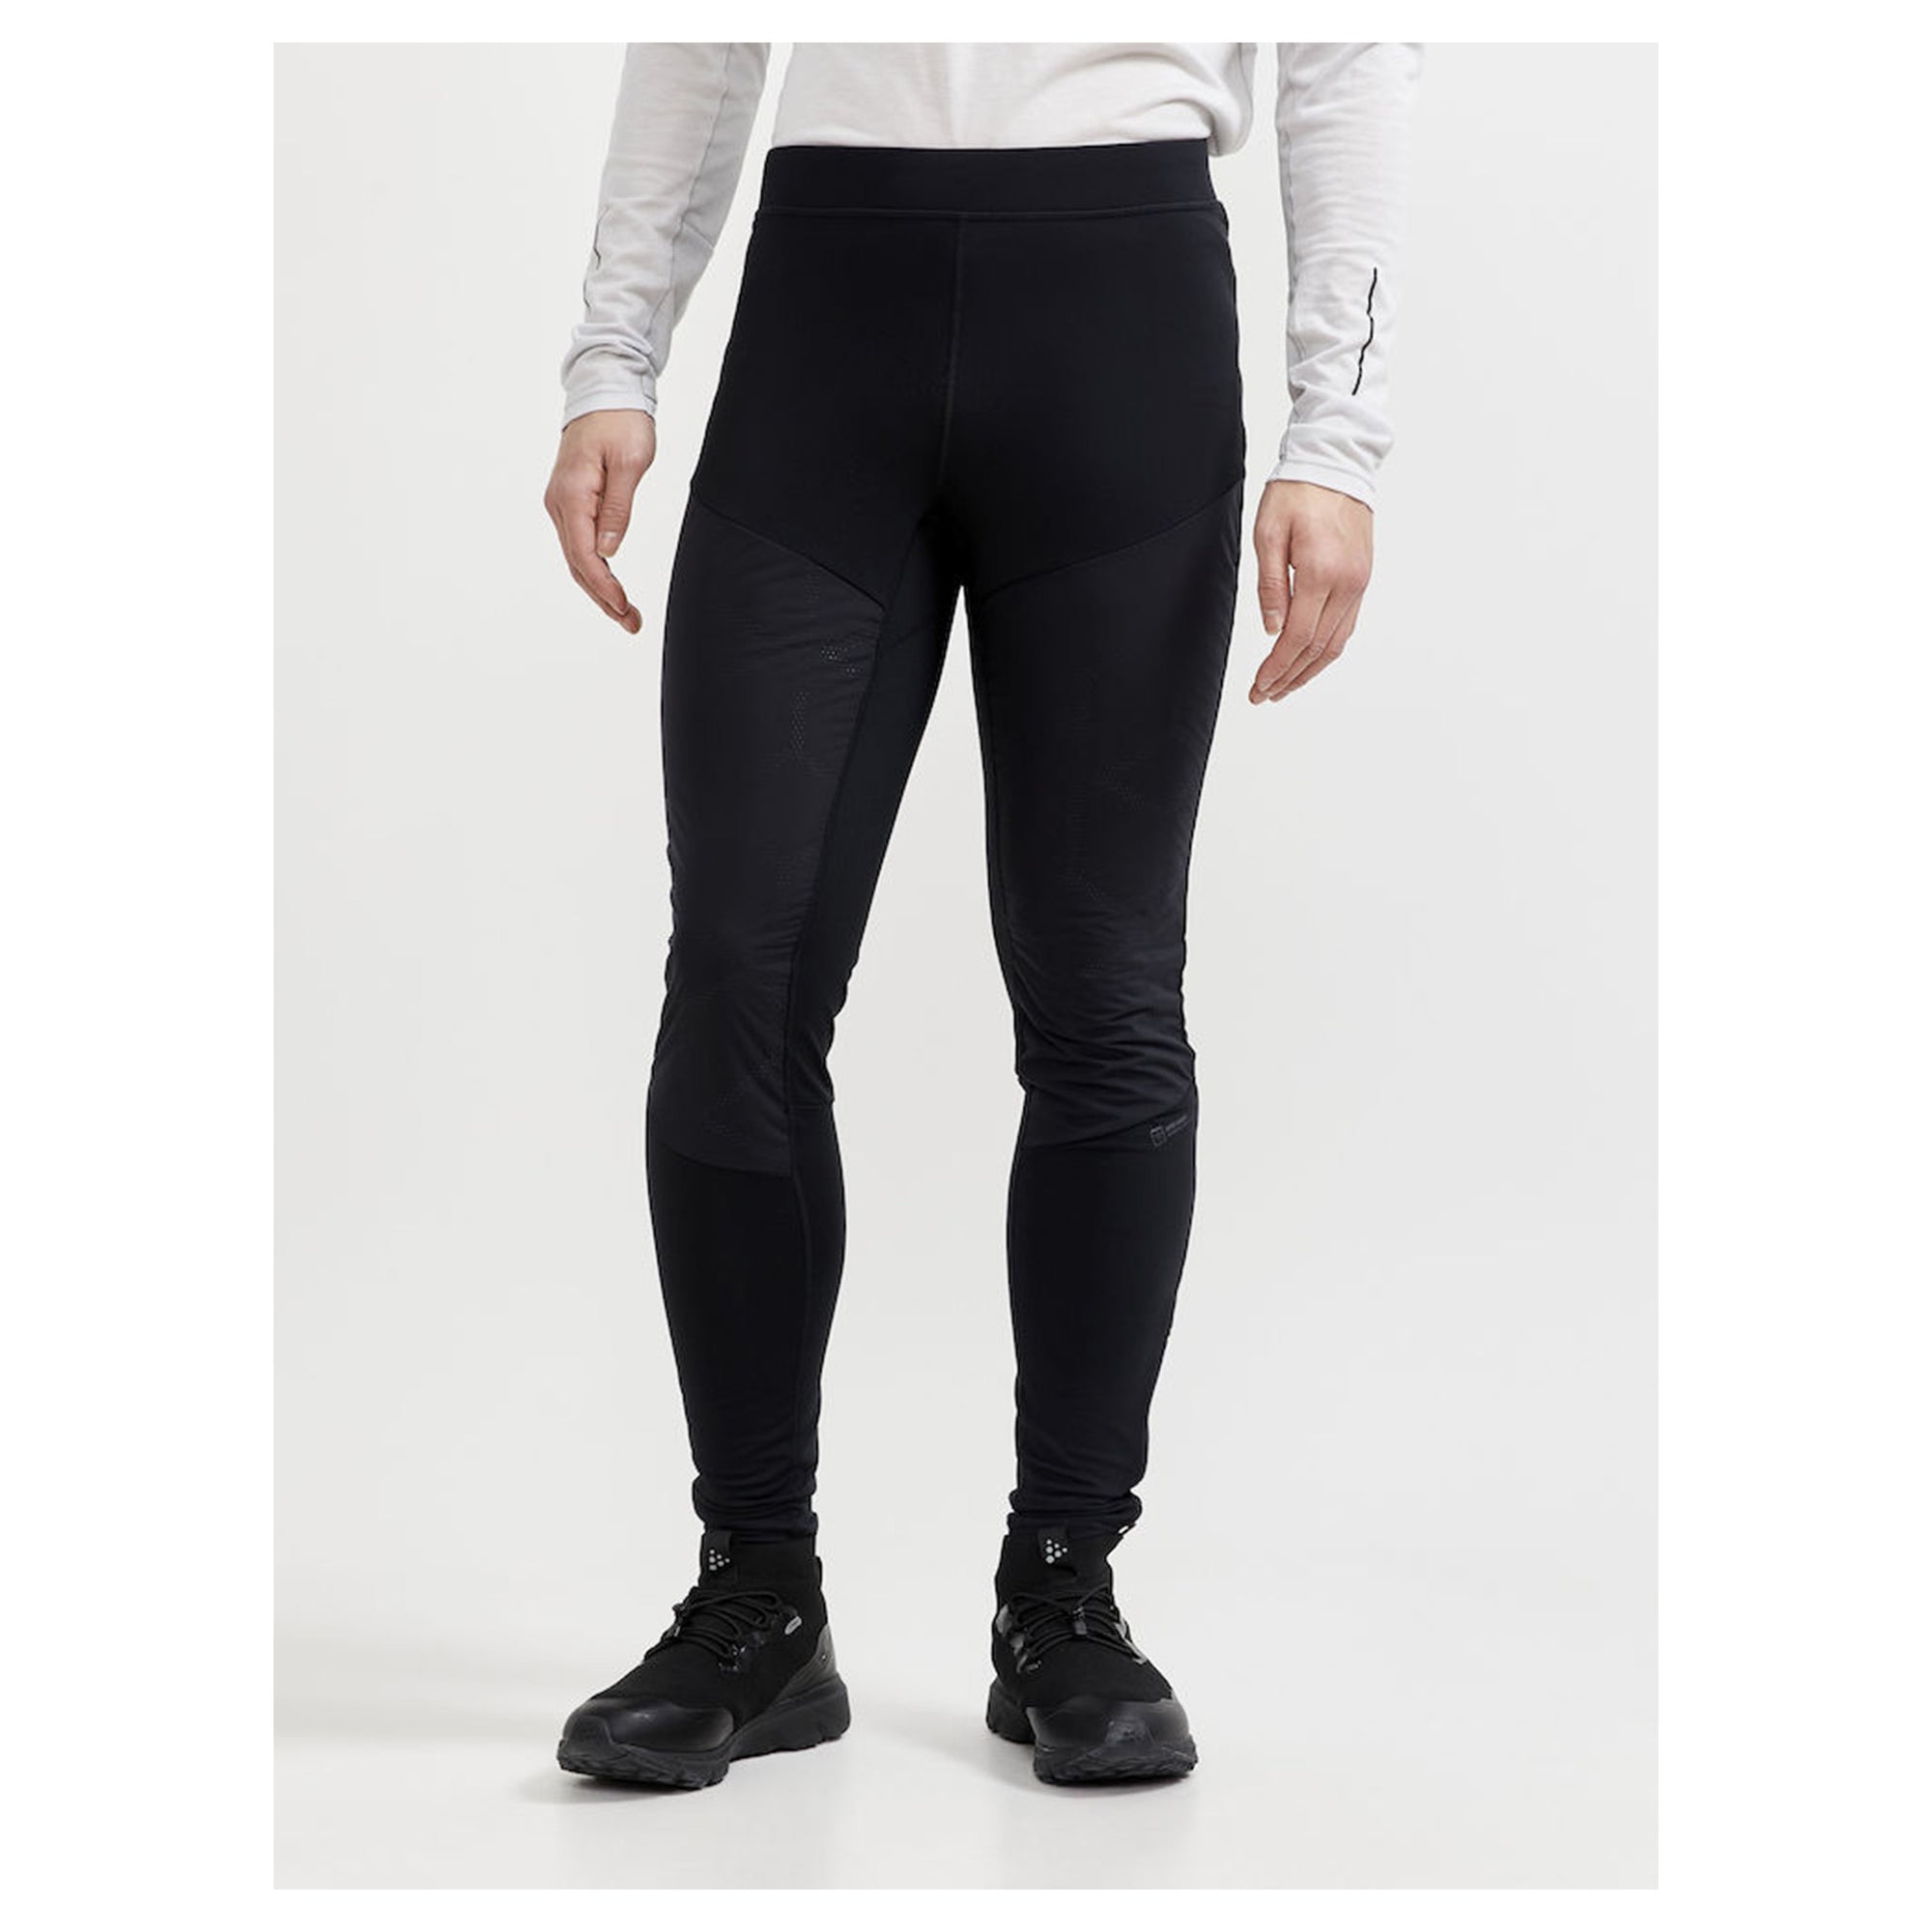 CRAFT ADV SUBZ TIGHTS 2 - HOMME